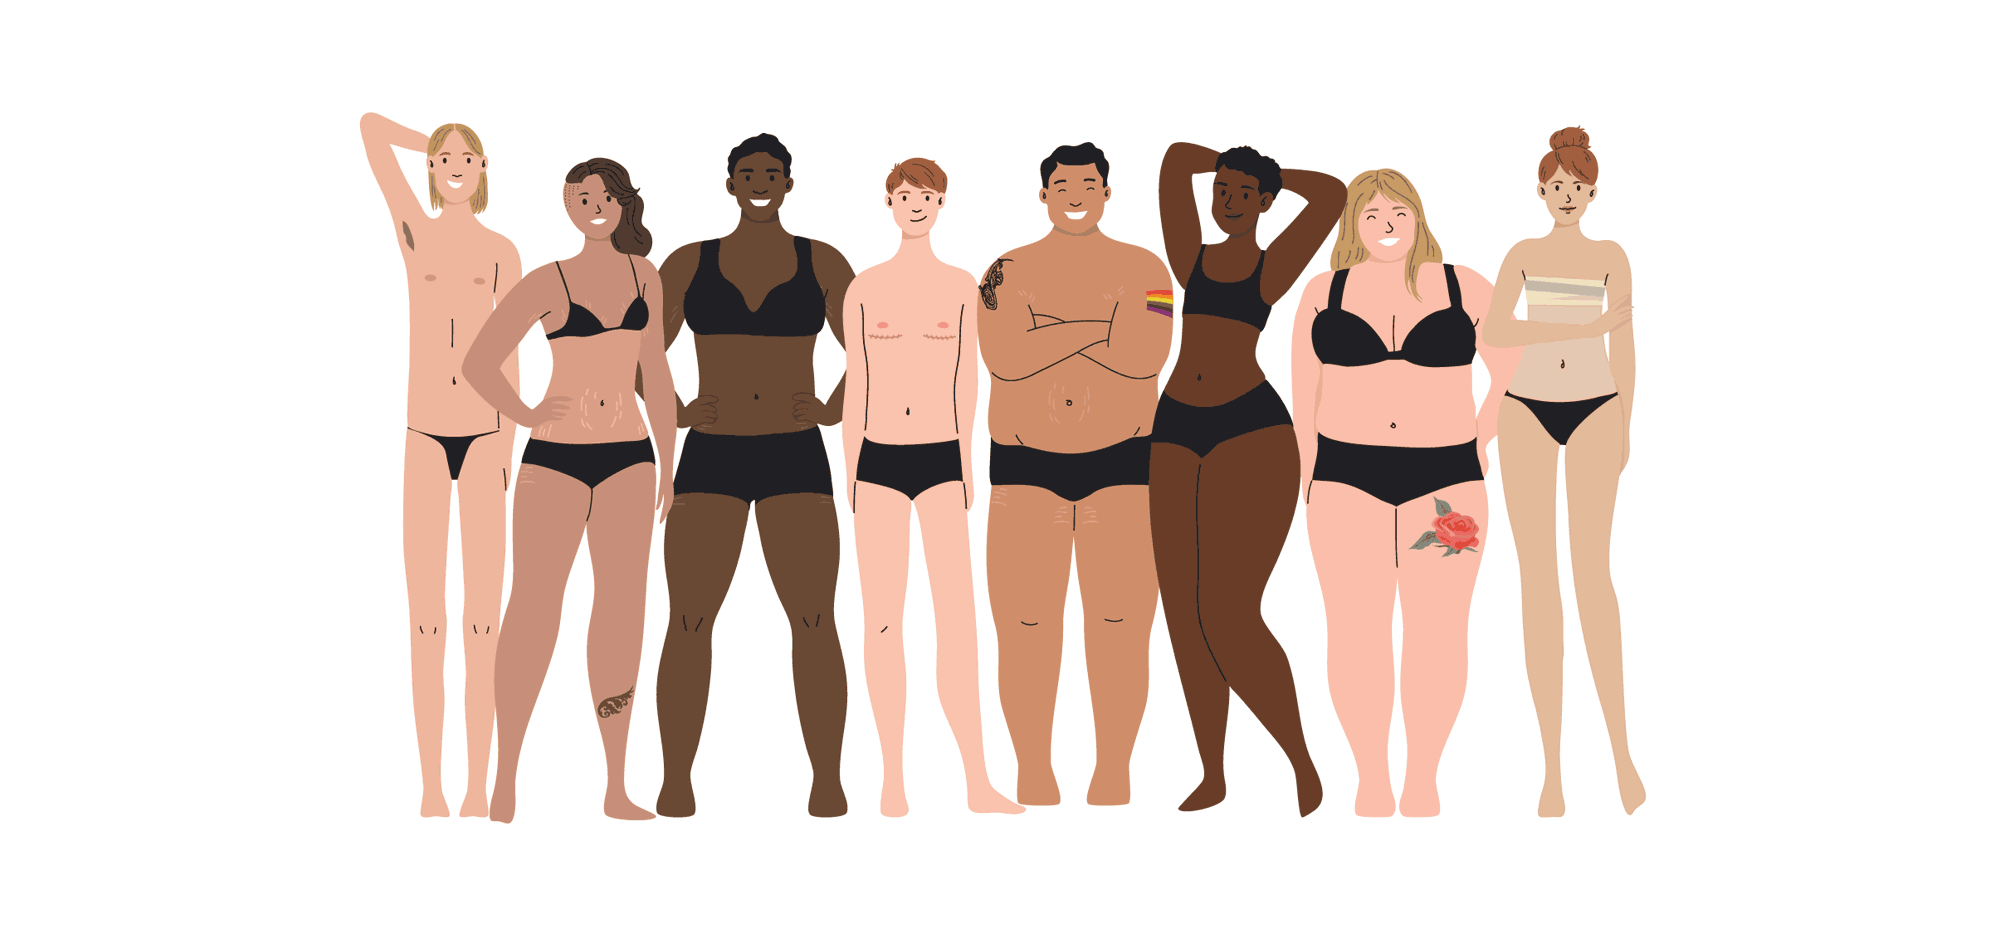 Group of diverse people in lingerie